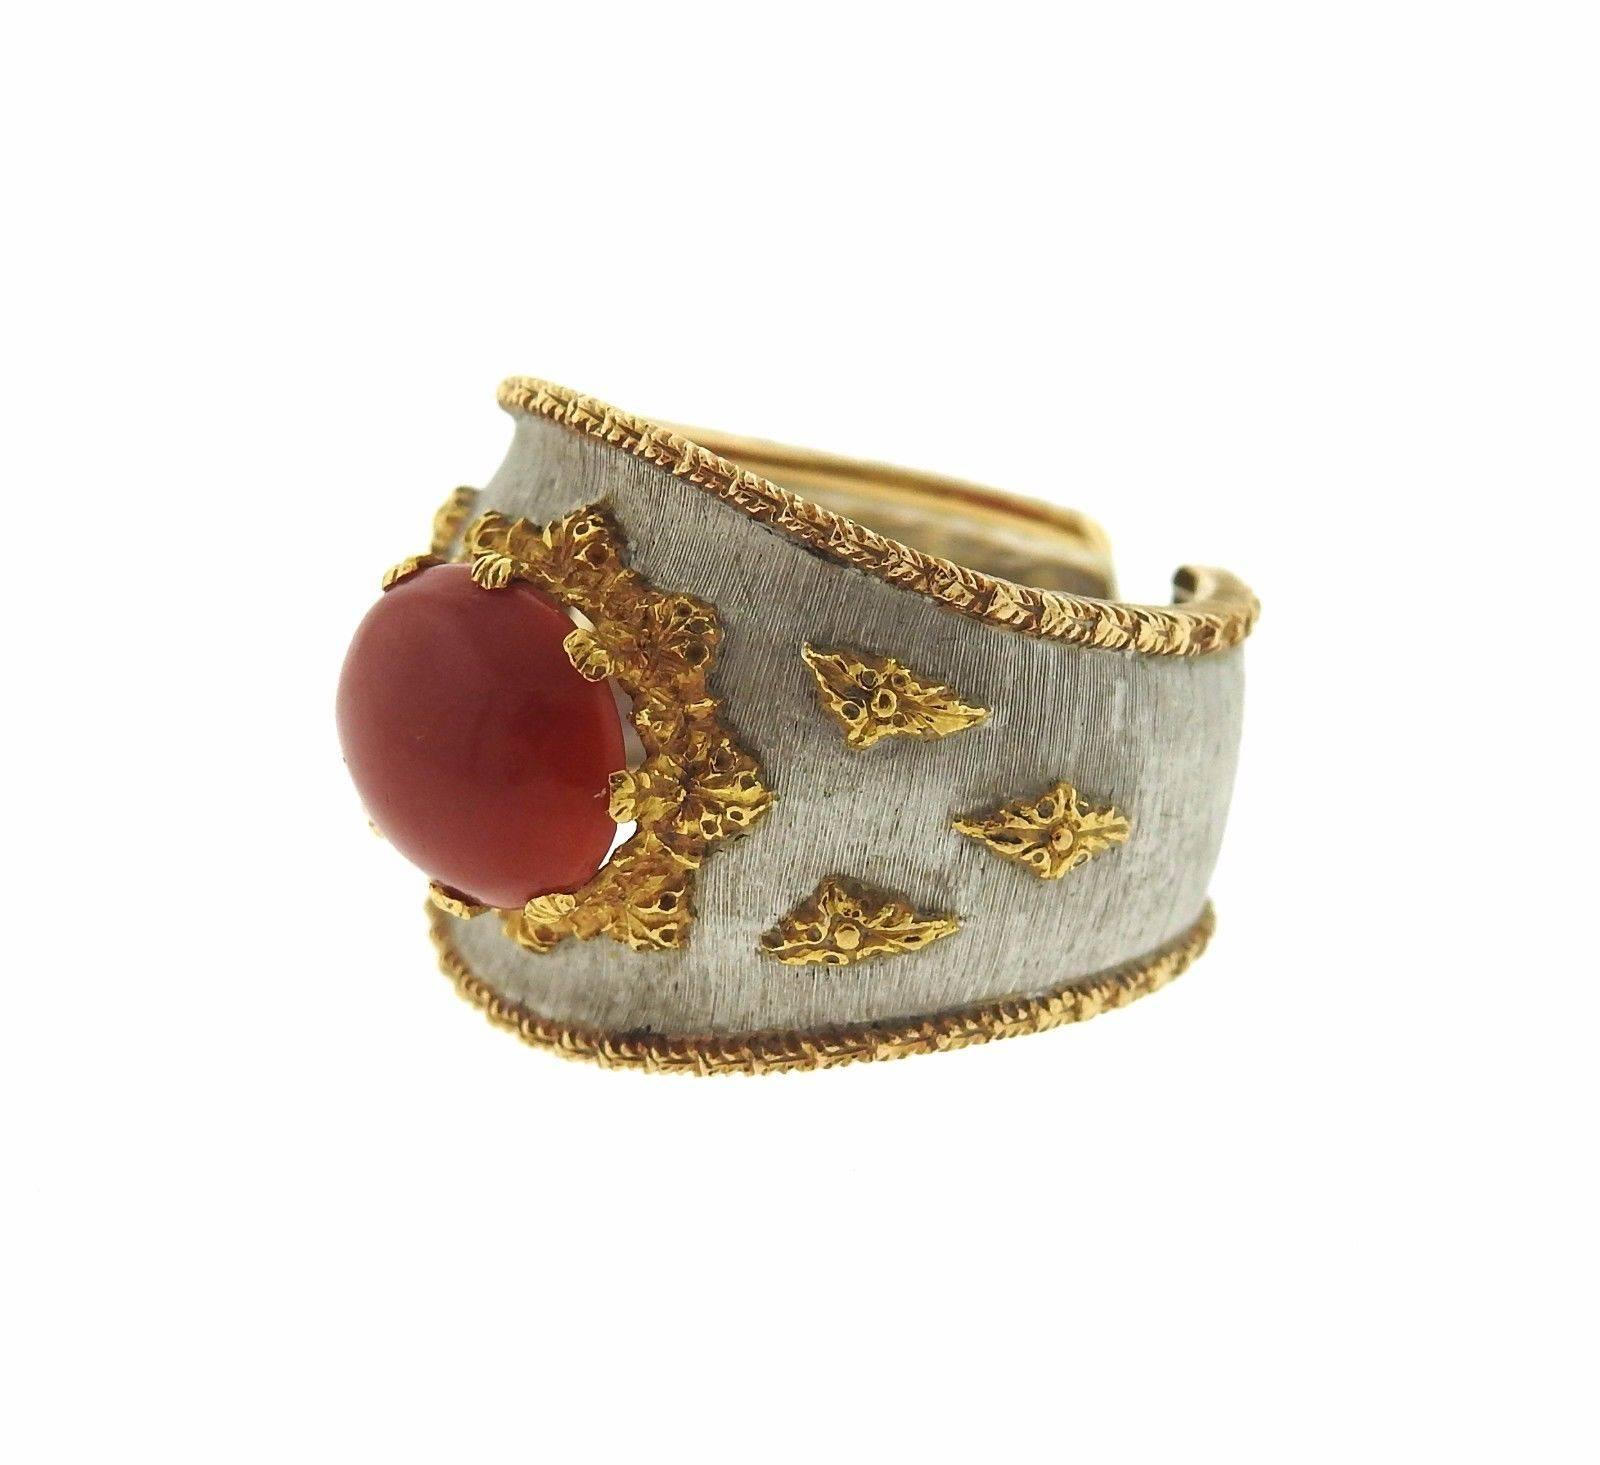 An 18k gold cuff ring set with a coral (10mm x 8mm).  The ring is a size 4.75 and 15.7mm wide.  The weight of the piece is 8.7 grams.  Marked: Buccellati, Italy, 750.